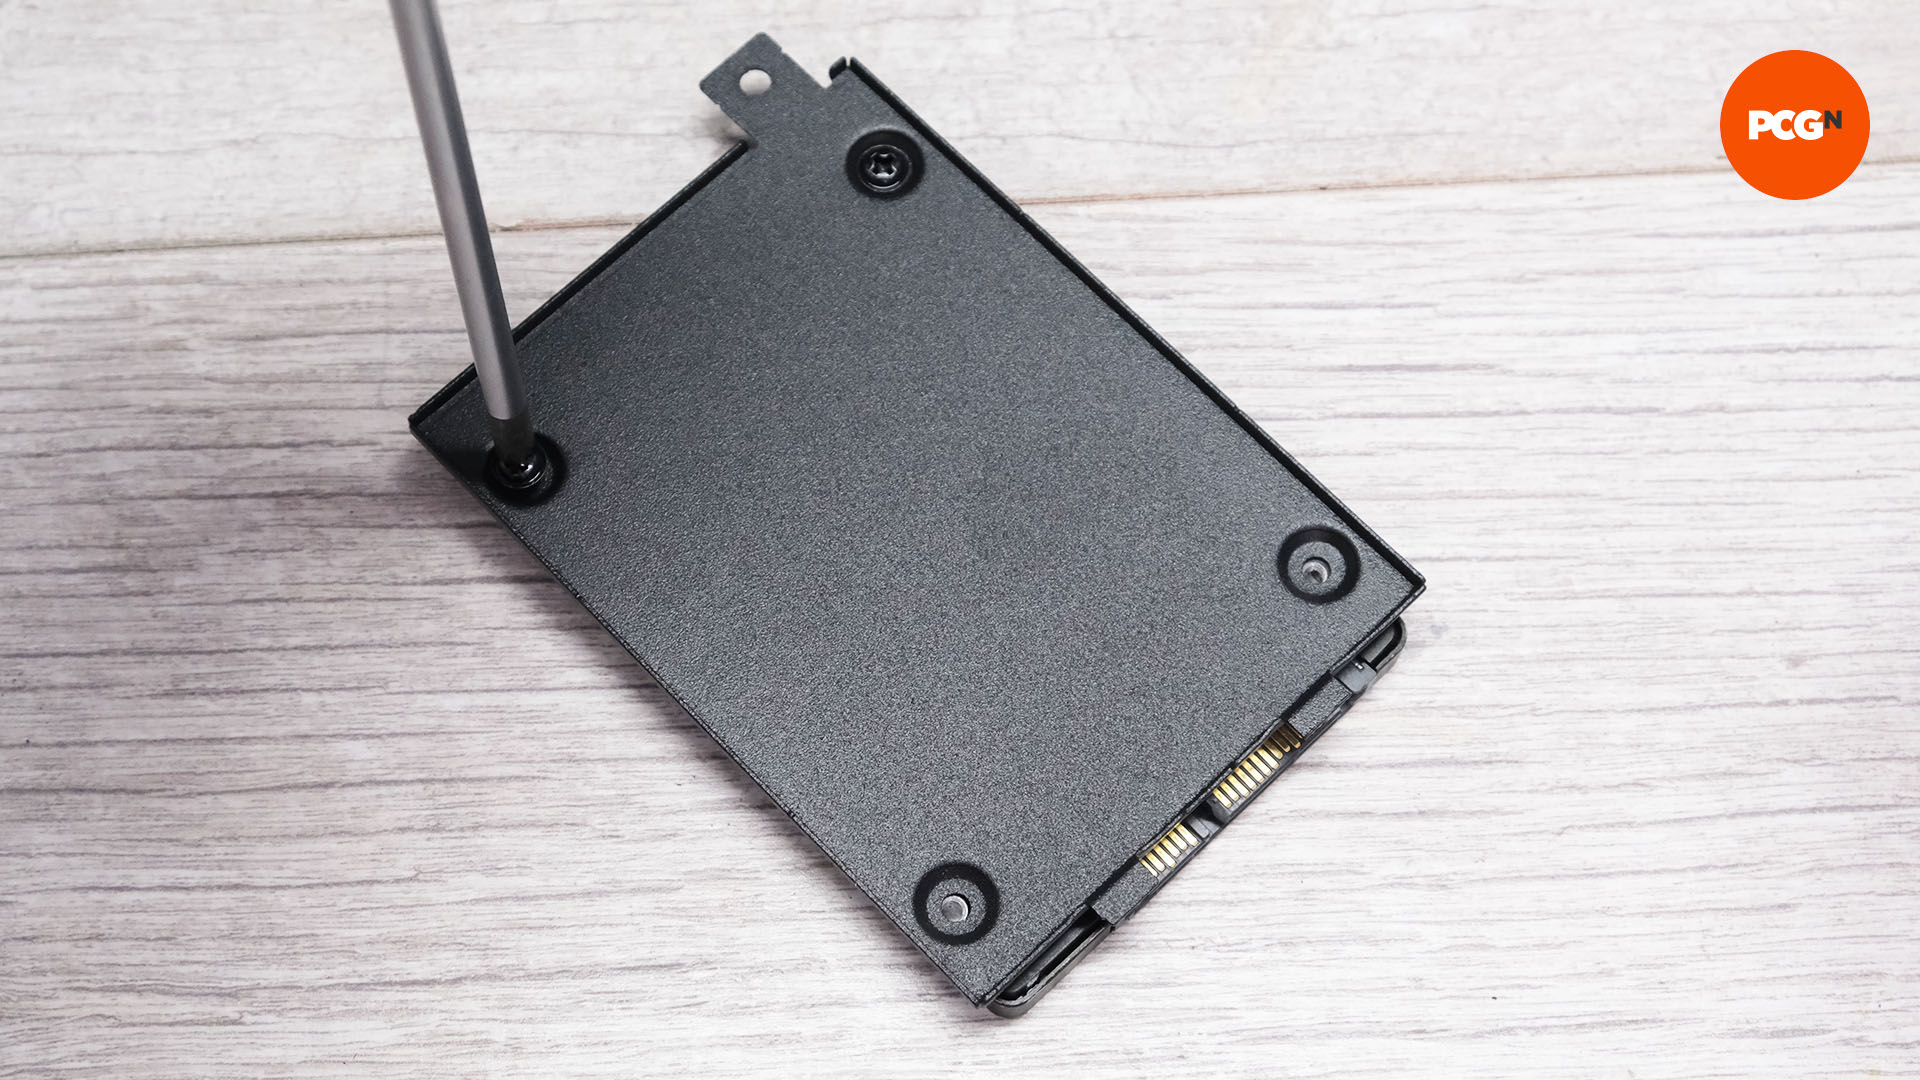 The SSD is mounted to its plate for the new gaming PC